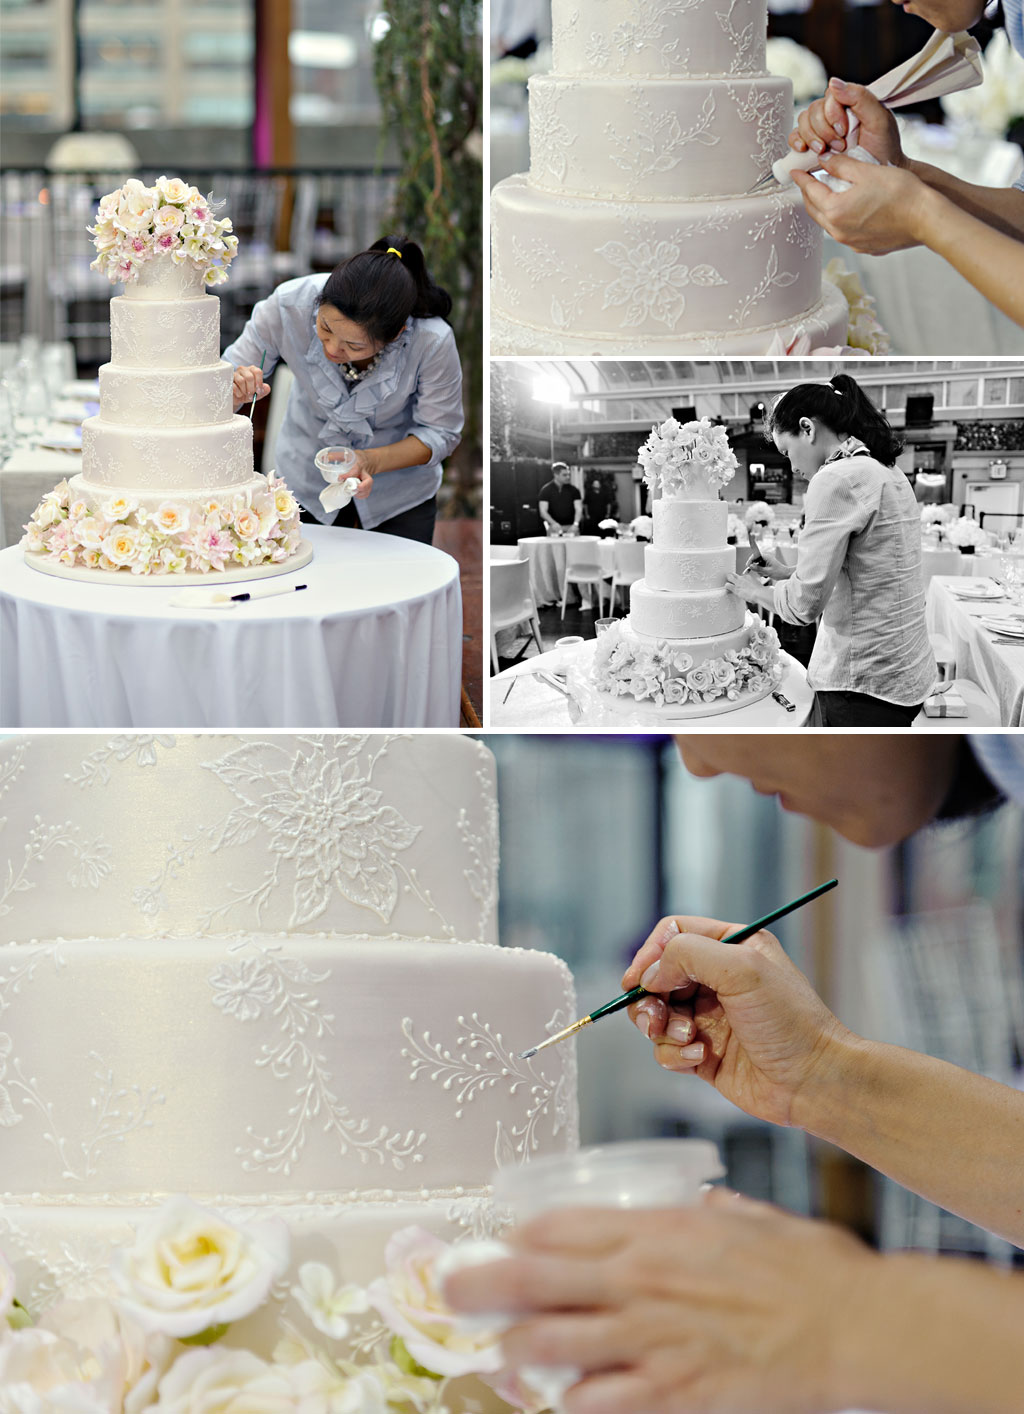 For The Love Of Cake By Garry And Ana Parzych Today Throws A Modern Day Wedding Wedding Cake 